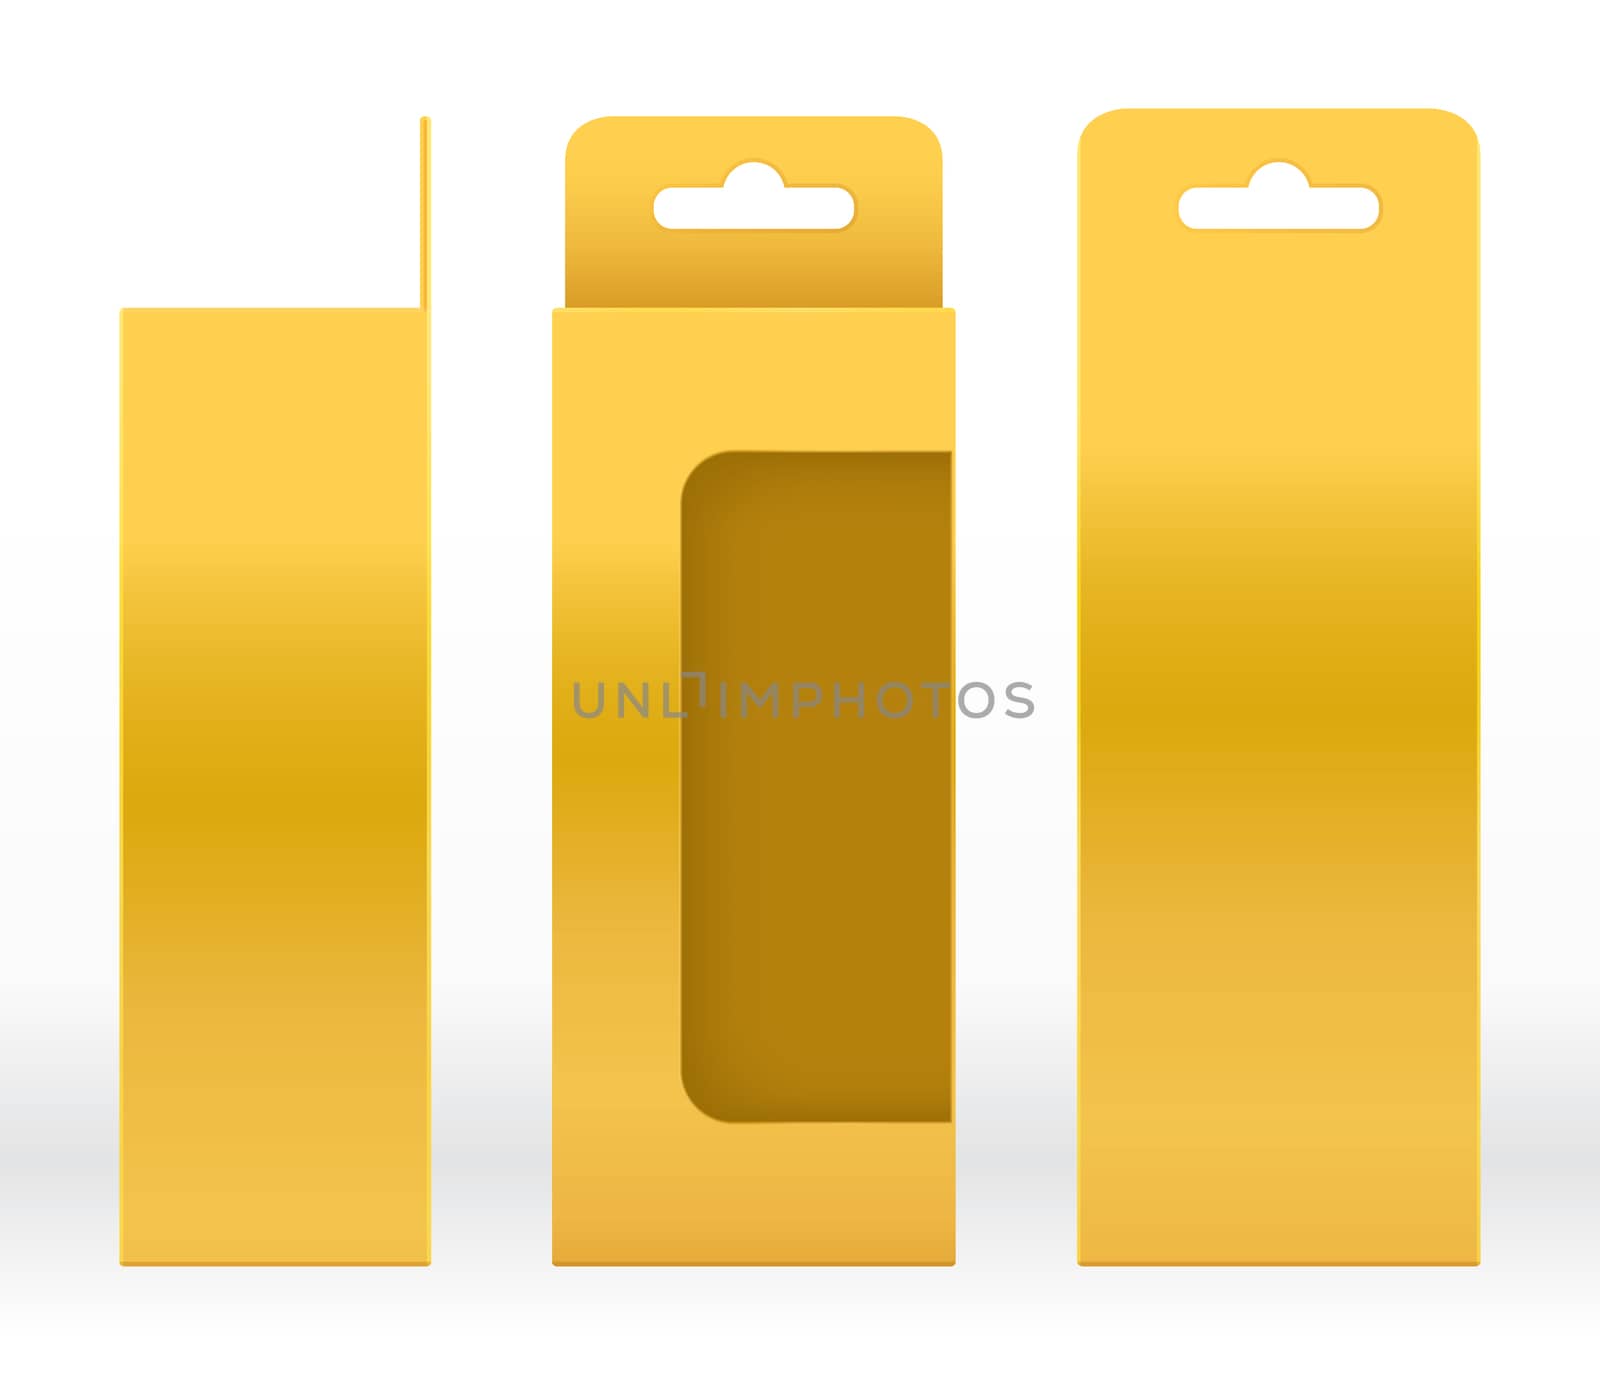 Hanging Box Gold window shape cut out Packaging Template blank. Luxury Empty Box Golden Template for design product package gift box, Gold Box packaging paper kraft cardboard package by cgdeaw